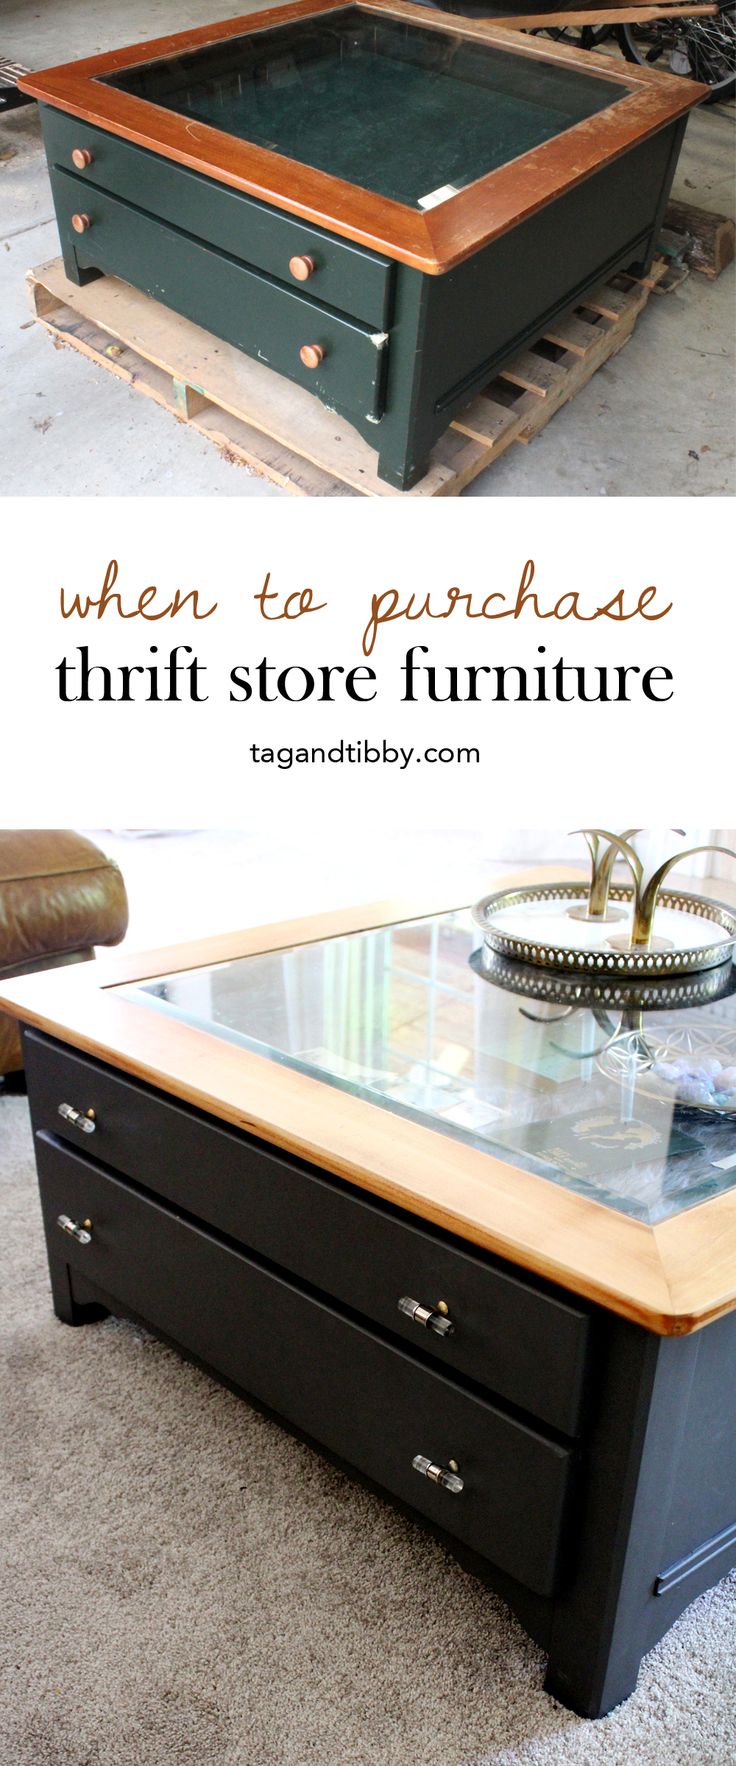 When Should You Purchase Thrift Store Furniture?